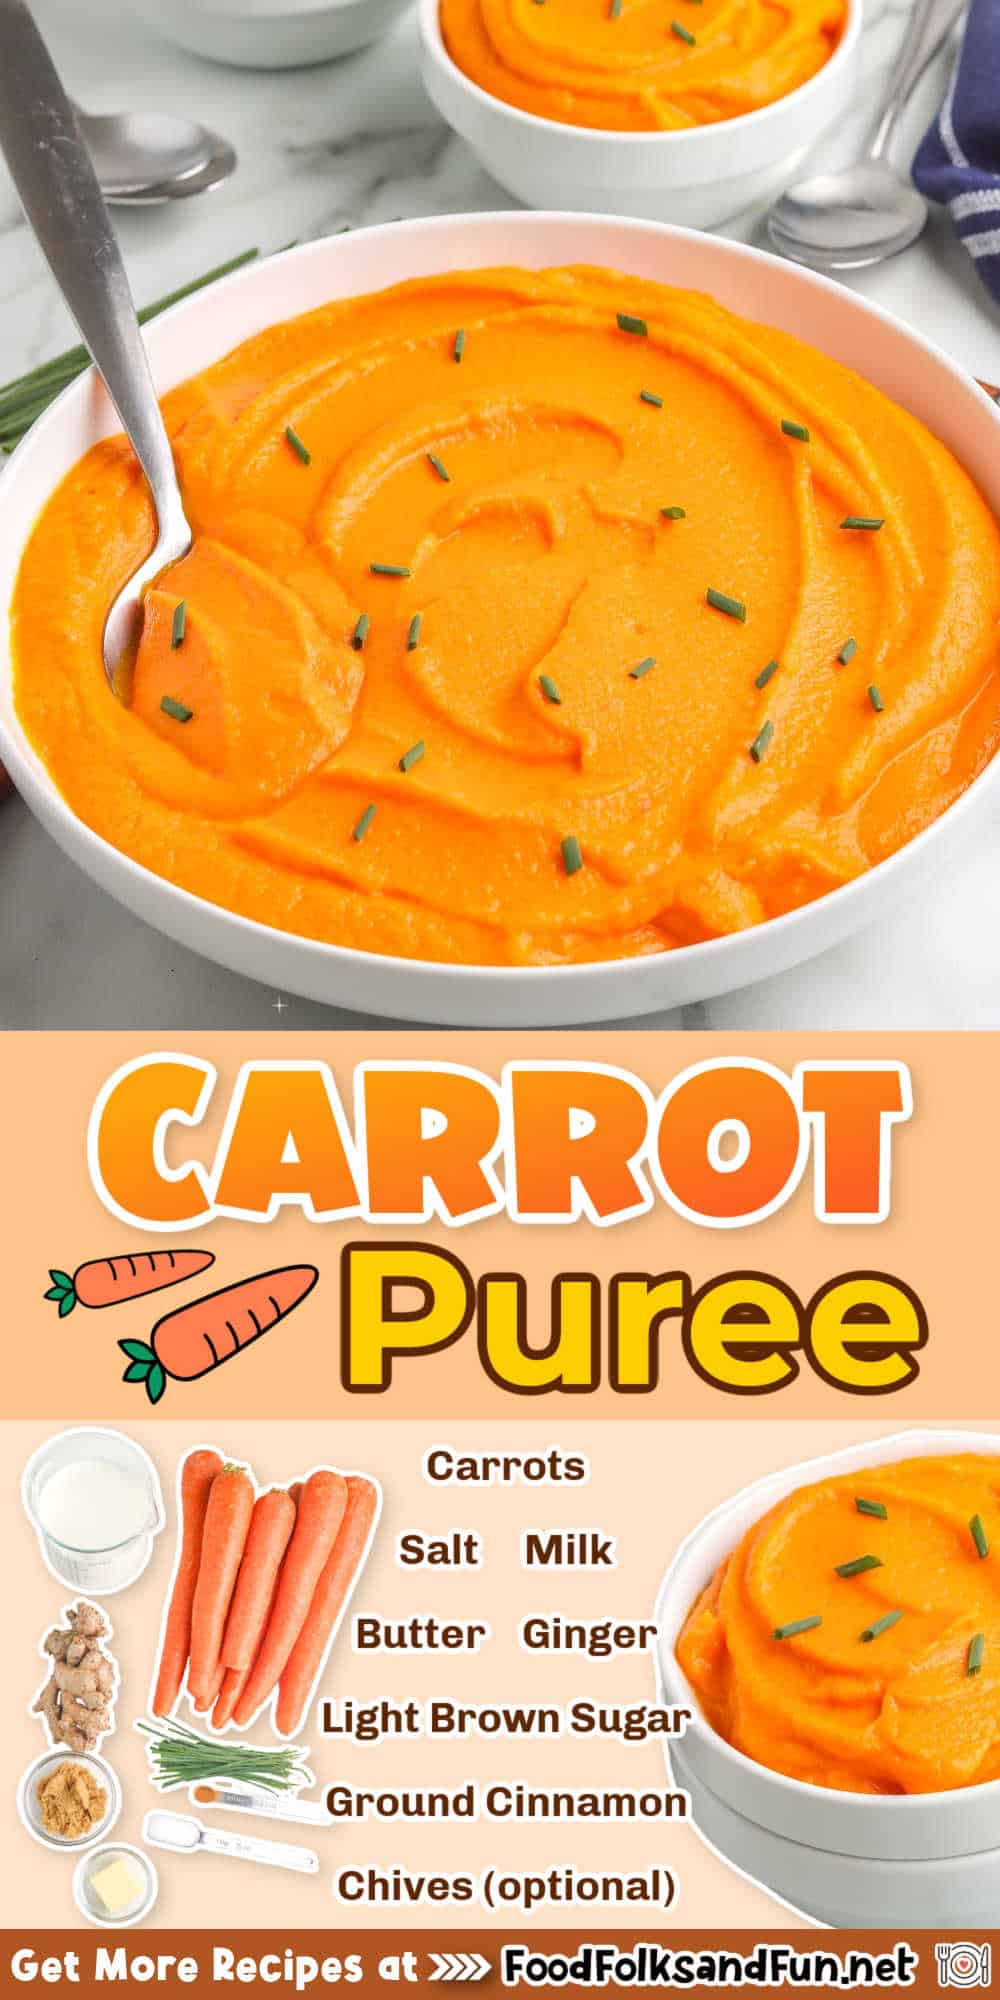 This carrot puree with ginger is a healthy and tasty side dish for Easter and spring entertaining in general. You can even make this carrot puree up to 3 days in advance. via @foodfolksandfun